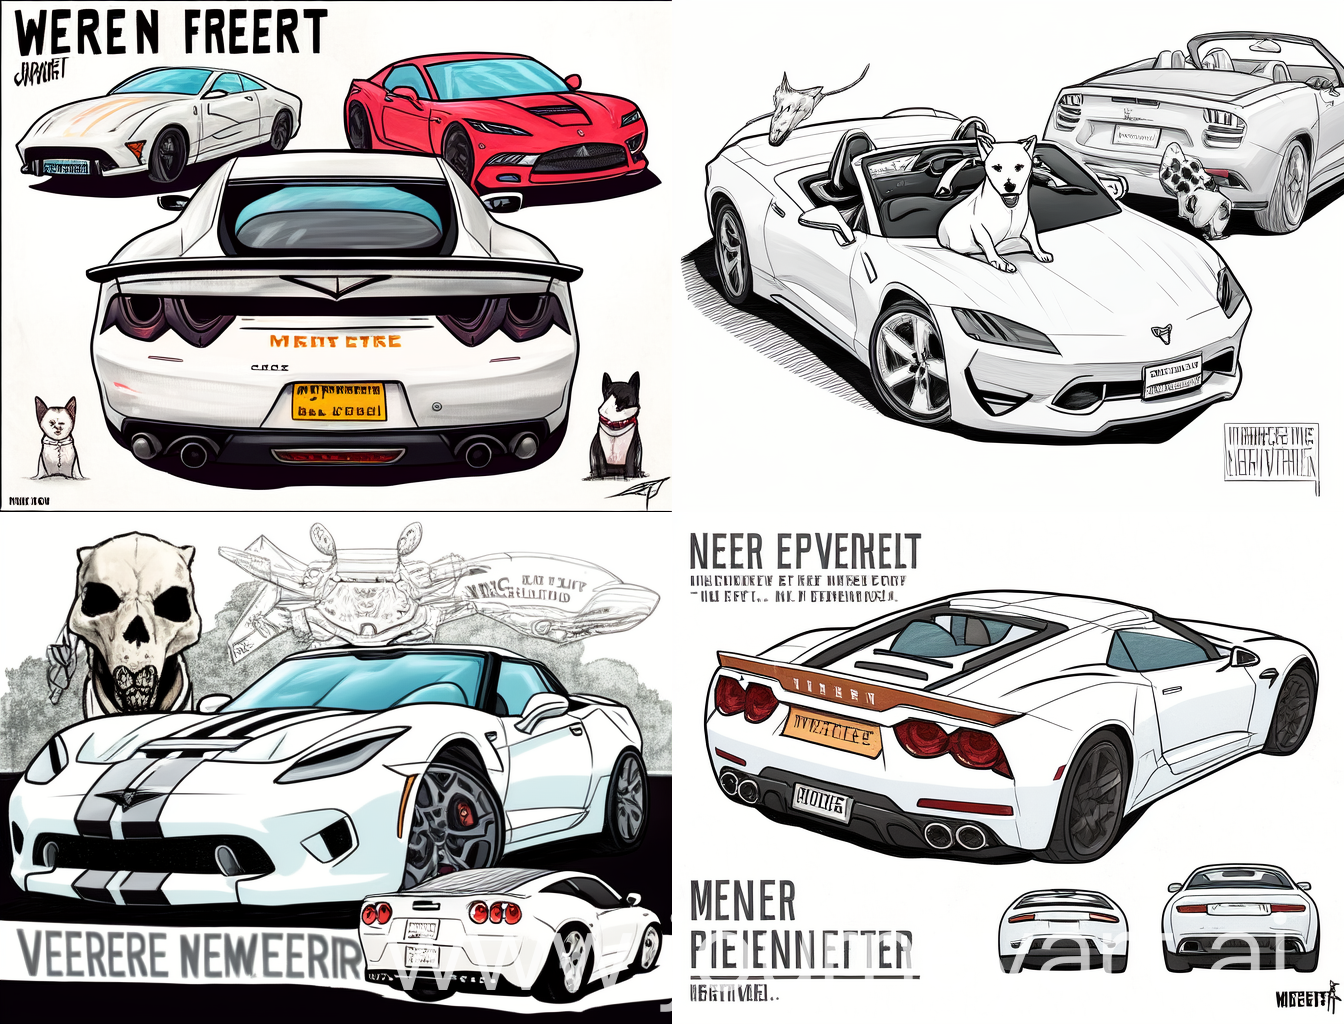 draw a car corvette c7 in white with an american pit bull terrier dog in it, view of the car from behind on the top right, licence plates on the car with the inscription "MERCY" next to it draw an electric guitar in the shape of "explorer" with next to it a white skull "no mercy" from the series "punisher". in the background draw a city in black colours, and a bitcoin chart that goes upwards. at the very top the inscription "american capitalist".

Translated with DeepL.com (free version)